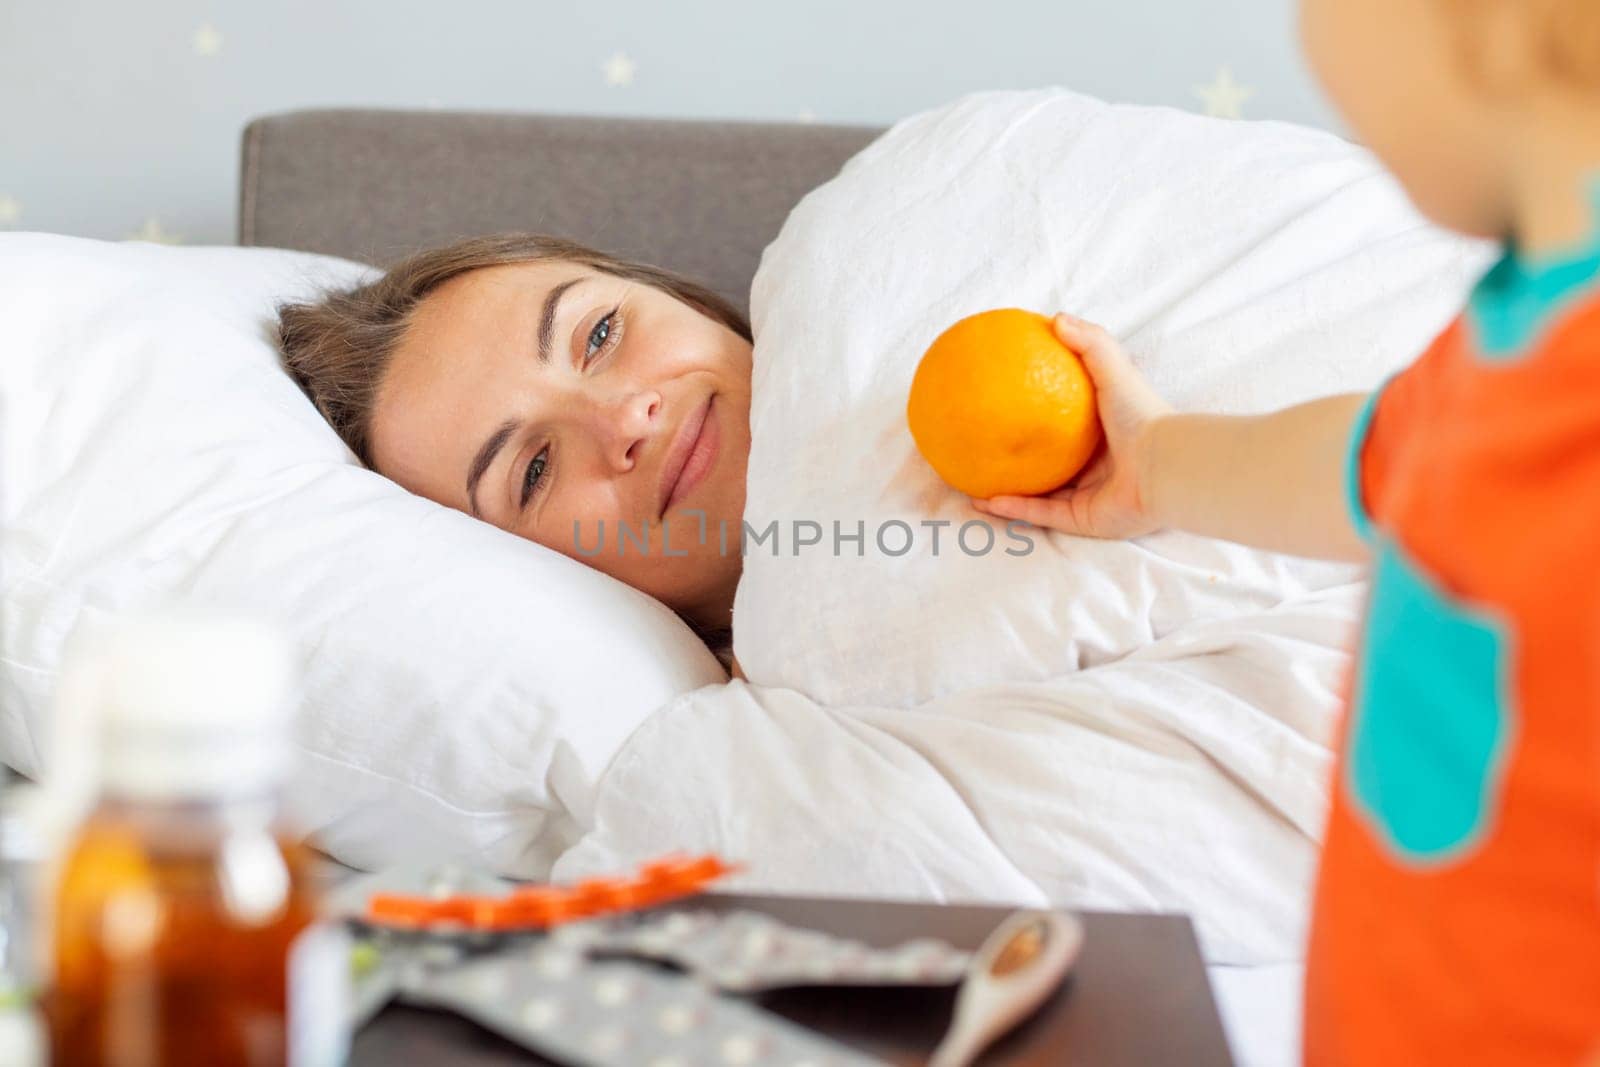 Child Offering Orange to Sick Mother in Bed by andreyz